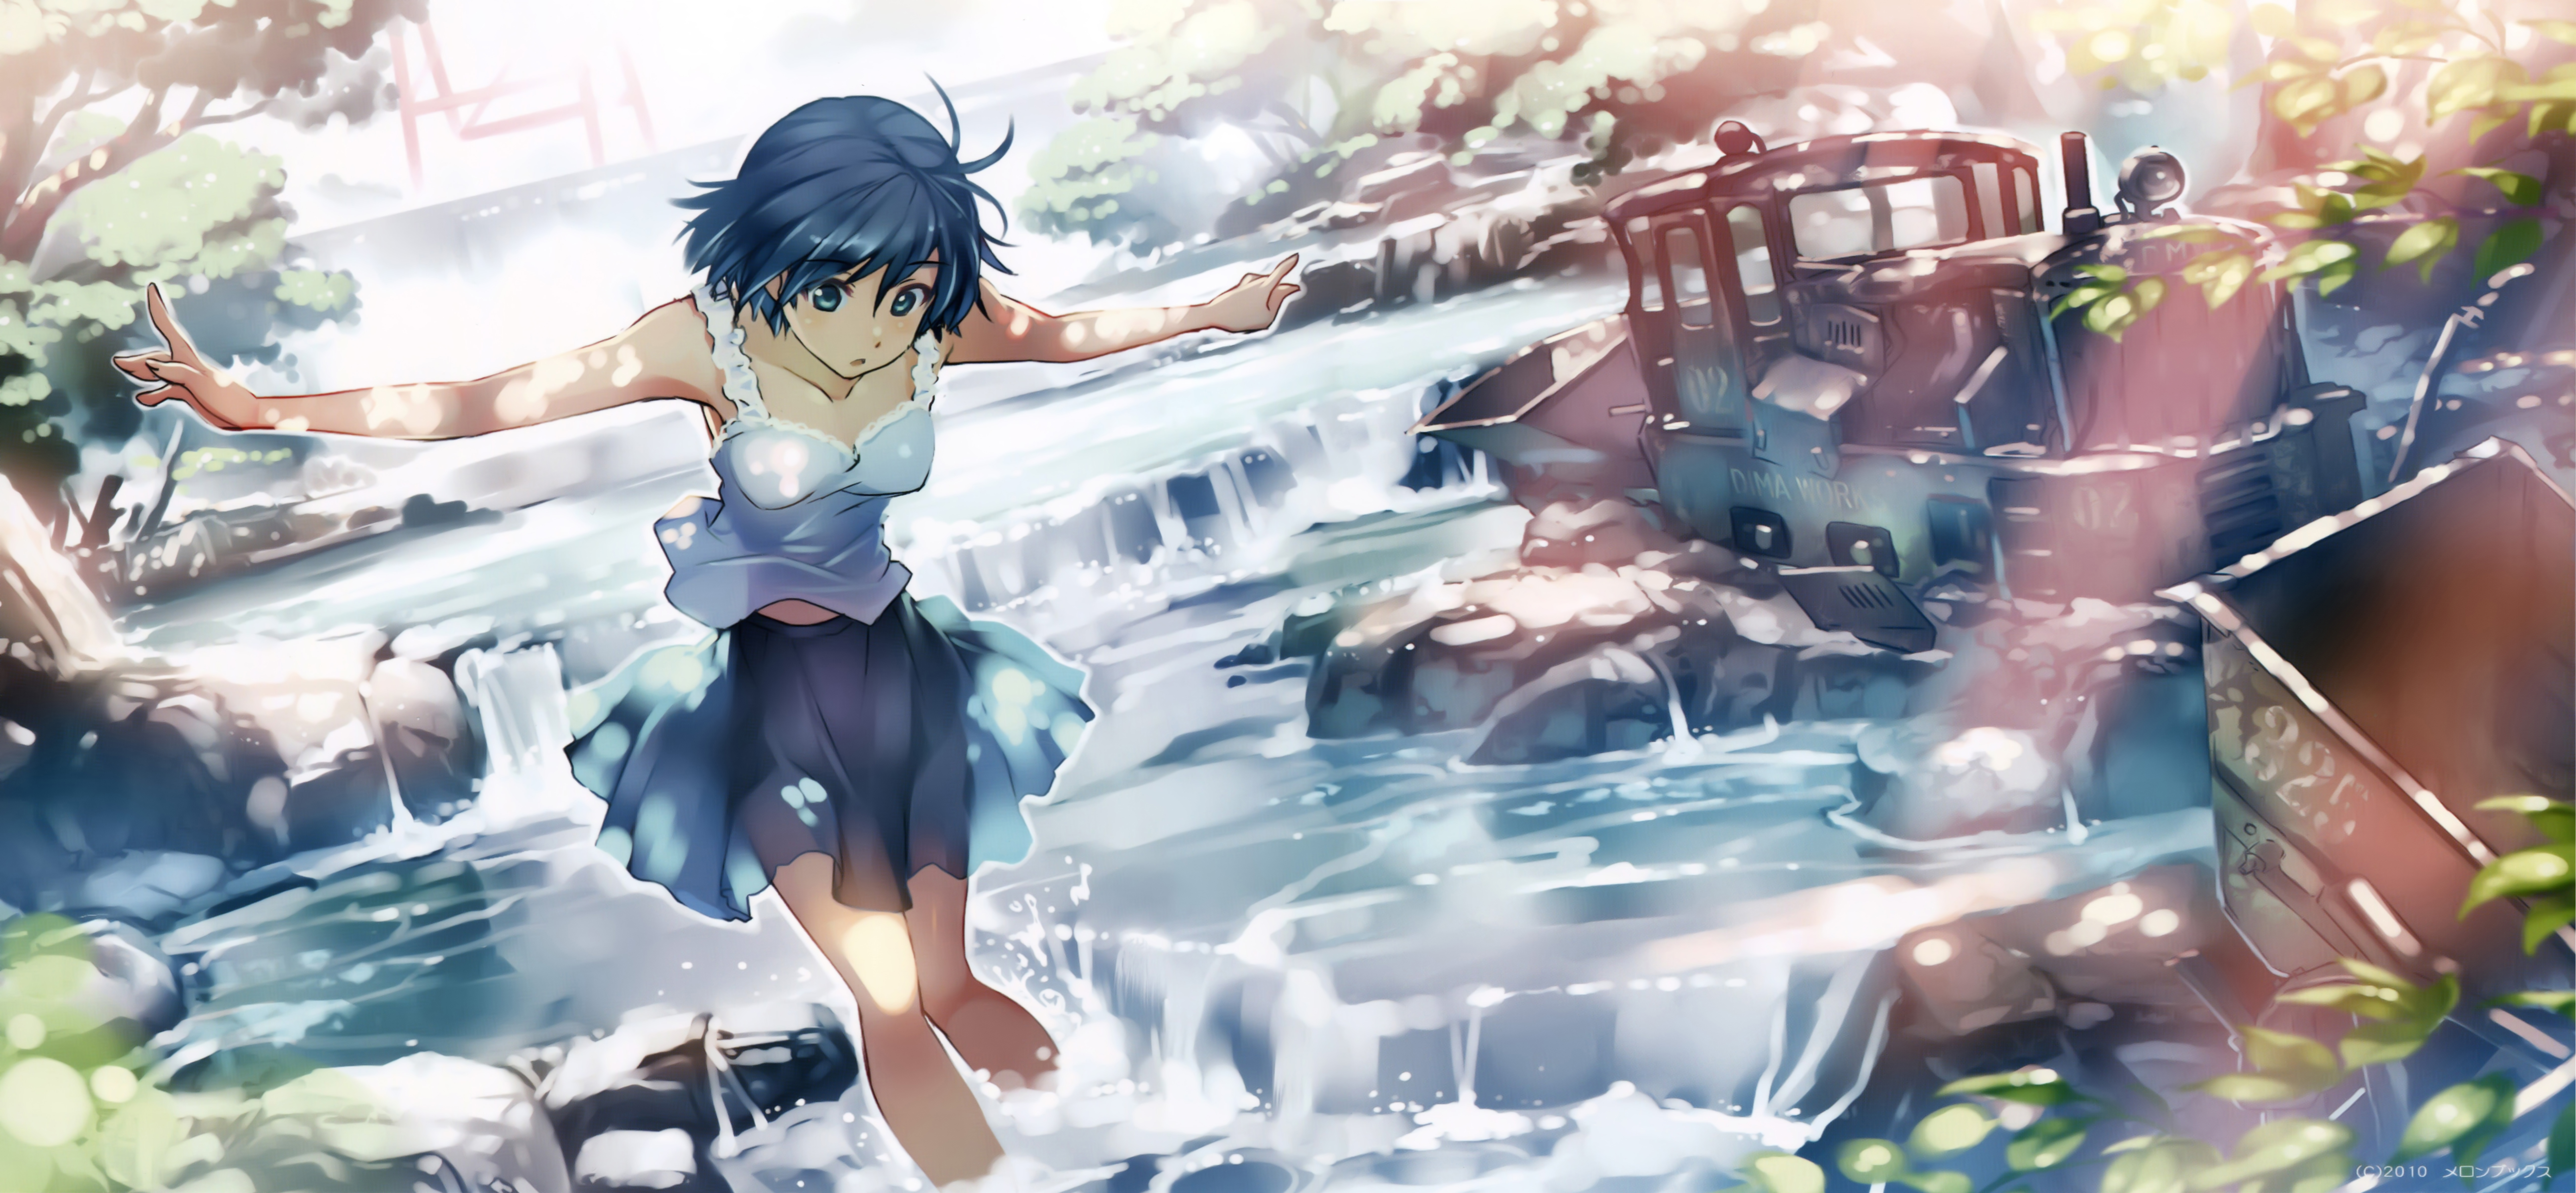 When I was young, I fell into river... - Ａｎｉｍｅ Ａｅｓｔｈｅｔｉｃ グサペ | Facebook